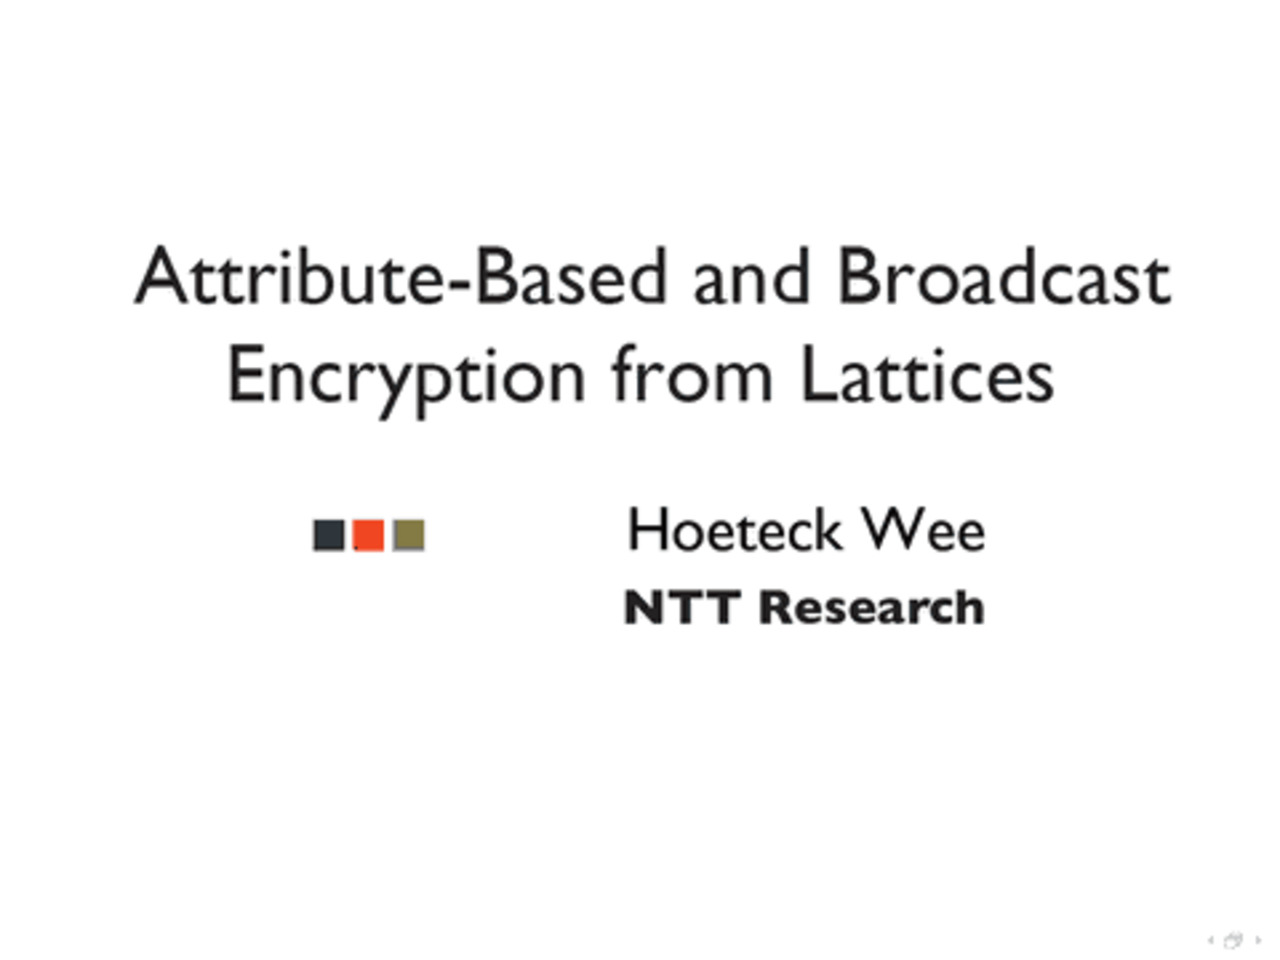 PEC-STPPA5 Invited talk 3: Attribute-Based and Broadcast Encryption from Lattices